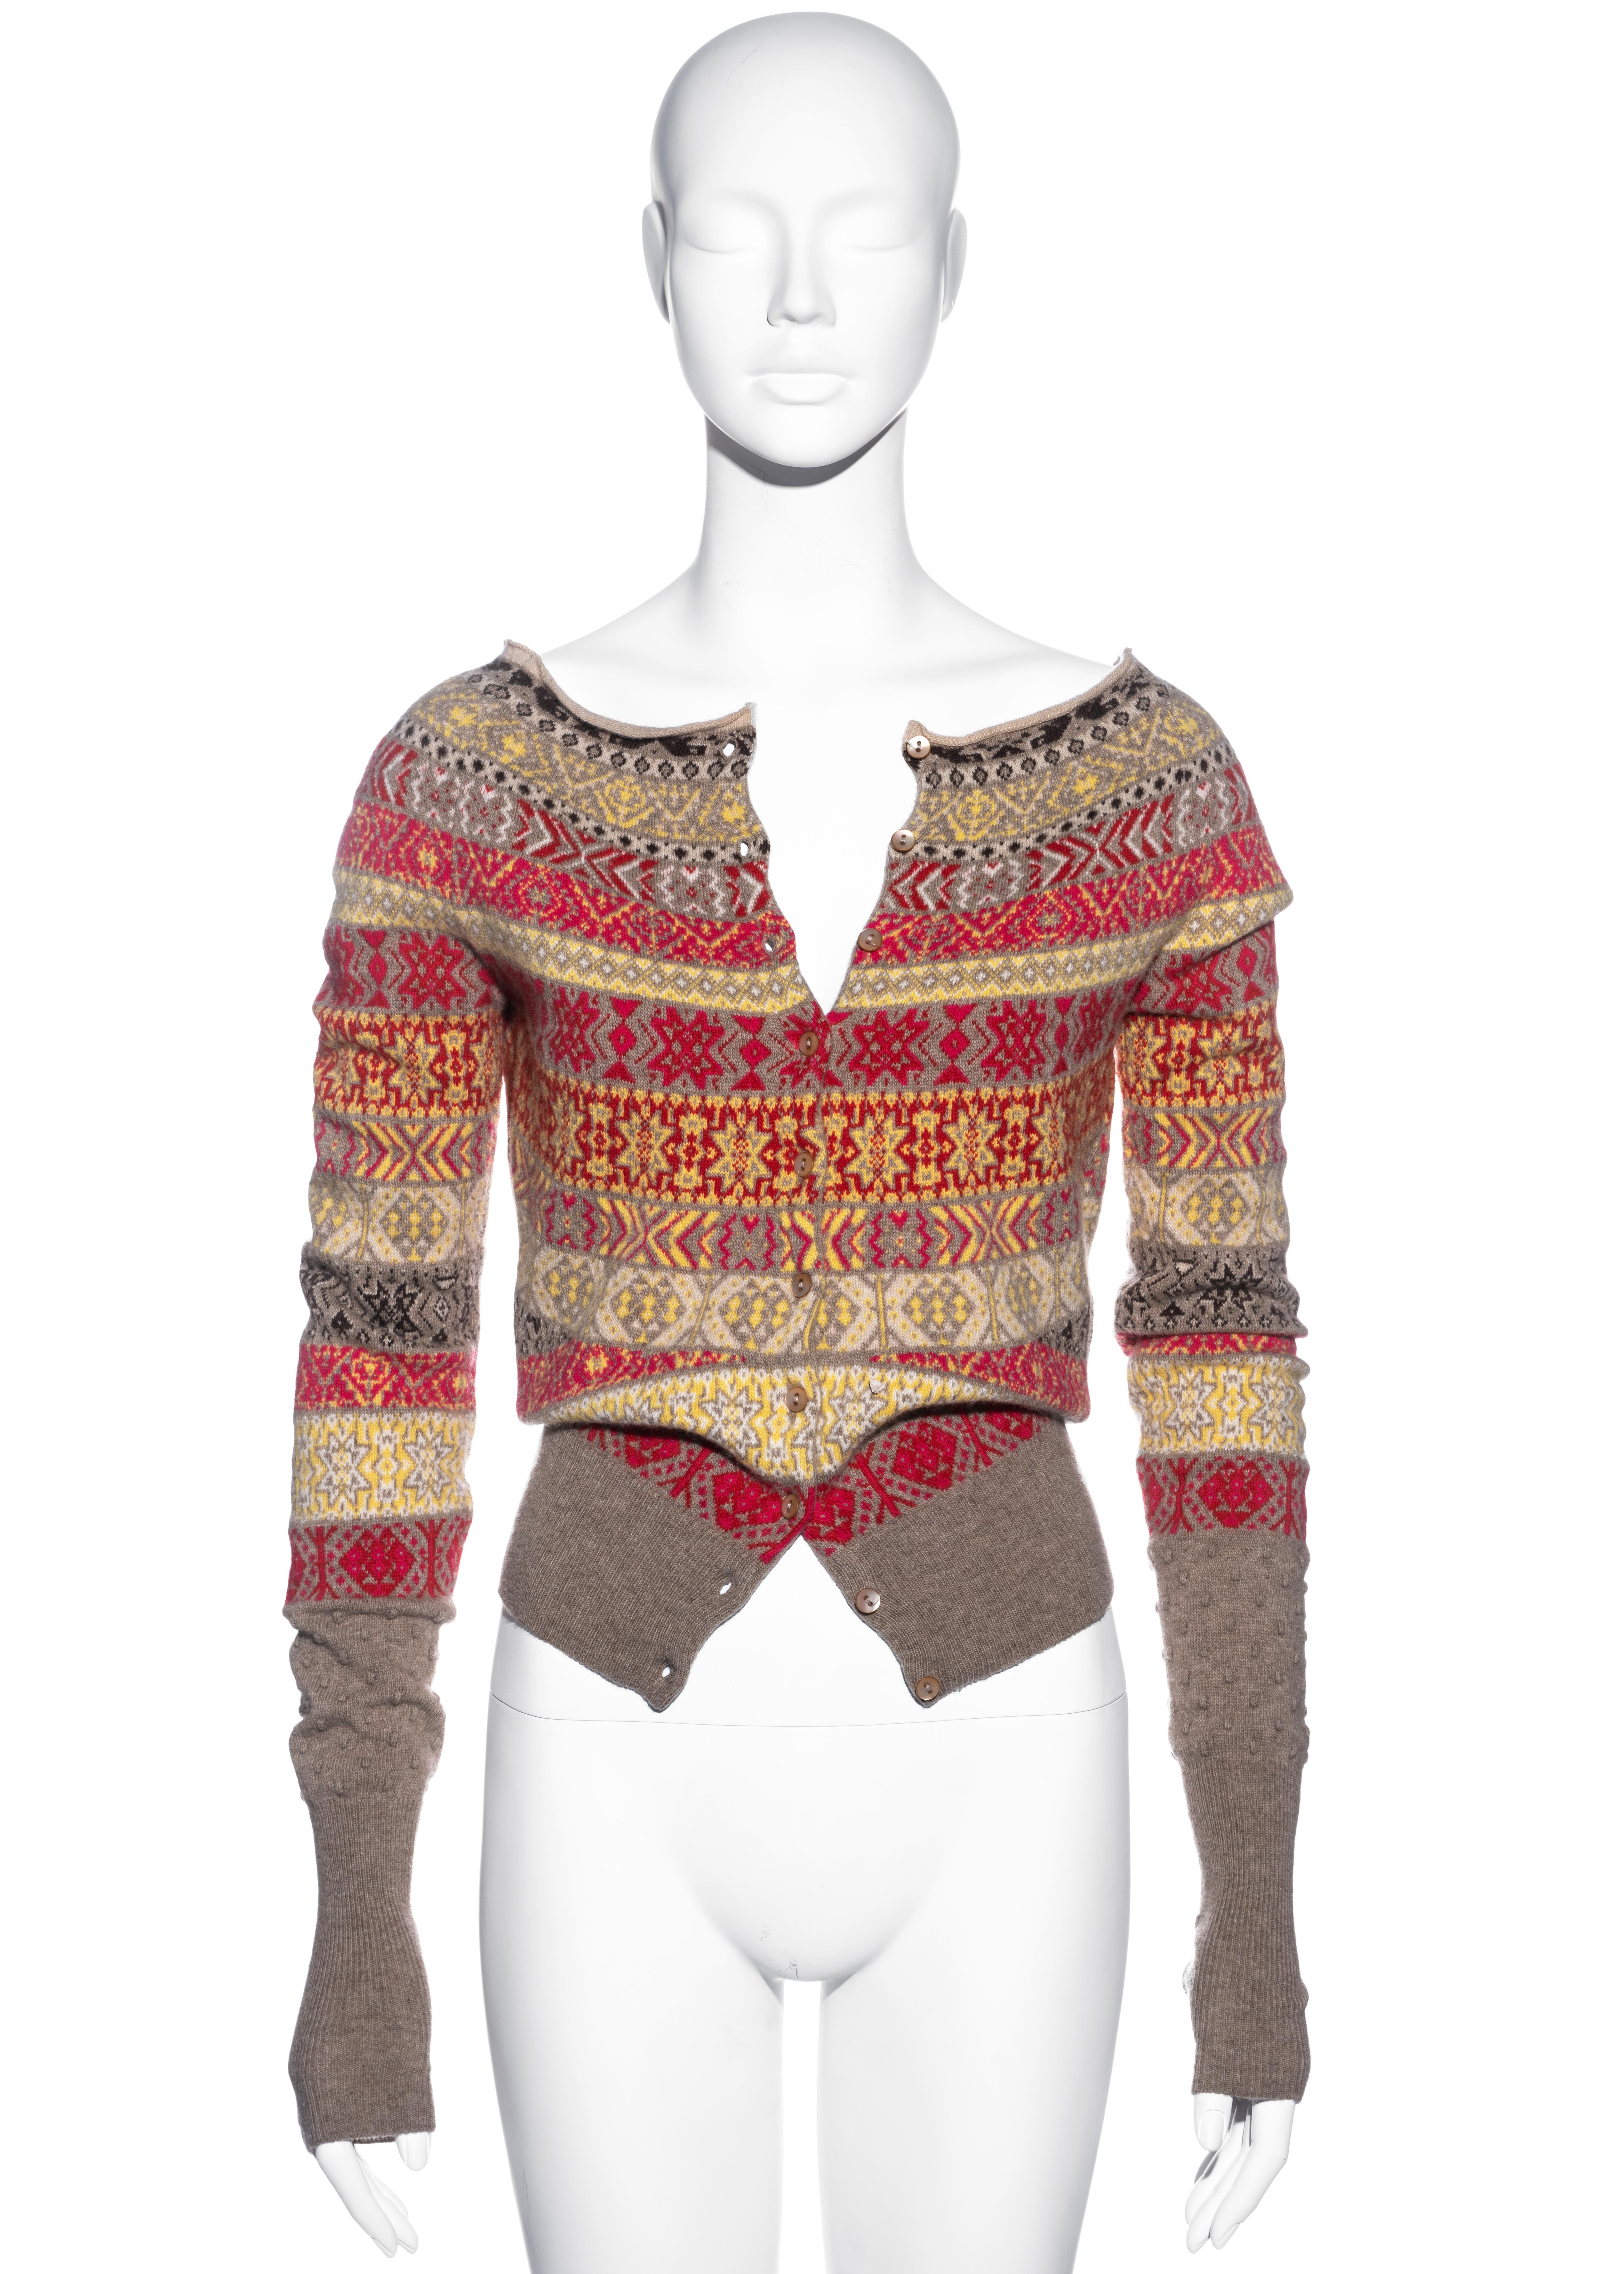 ▪ Alexander McQueen multicoloured knitted cardigan
▪ 100% Wool
▪ Collarless design 
▪ Button closures 
▪ Size Small
▪ Fall-Winter 2005